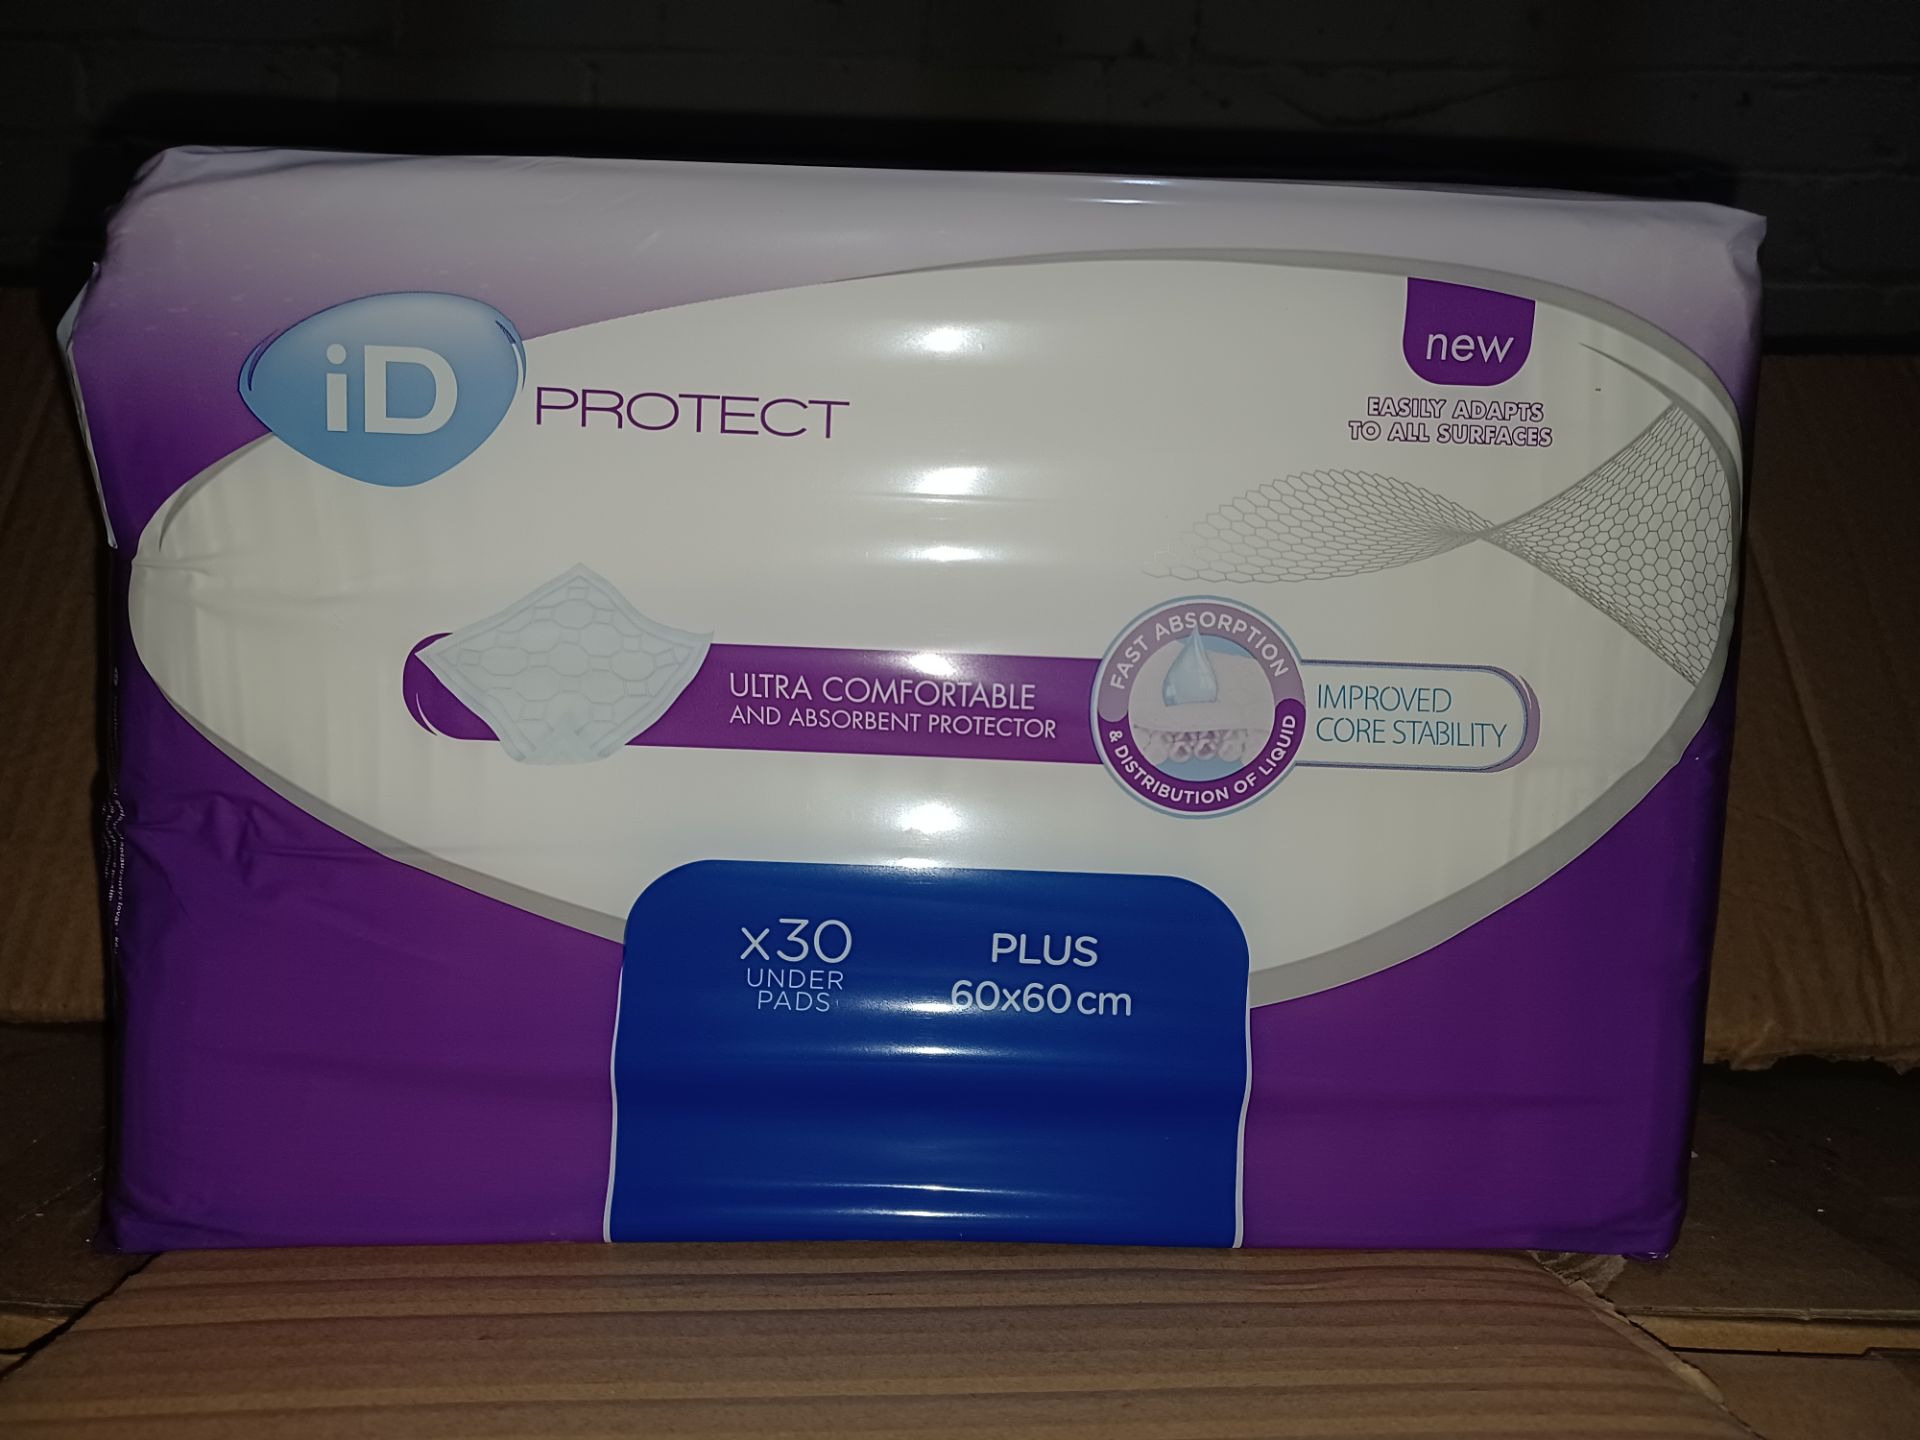 20 X BRAND NEW PACKS OF 30 ID PROTECT PLUS UNDER PADS IN 5 BOXES R9